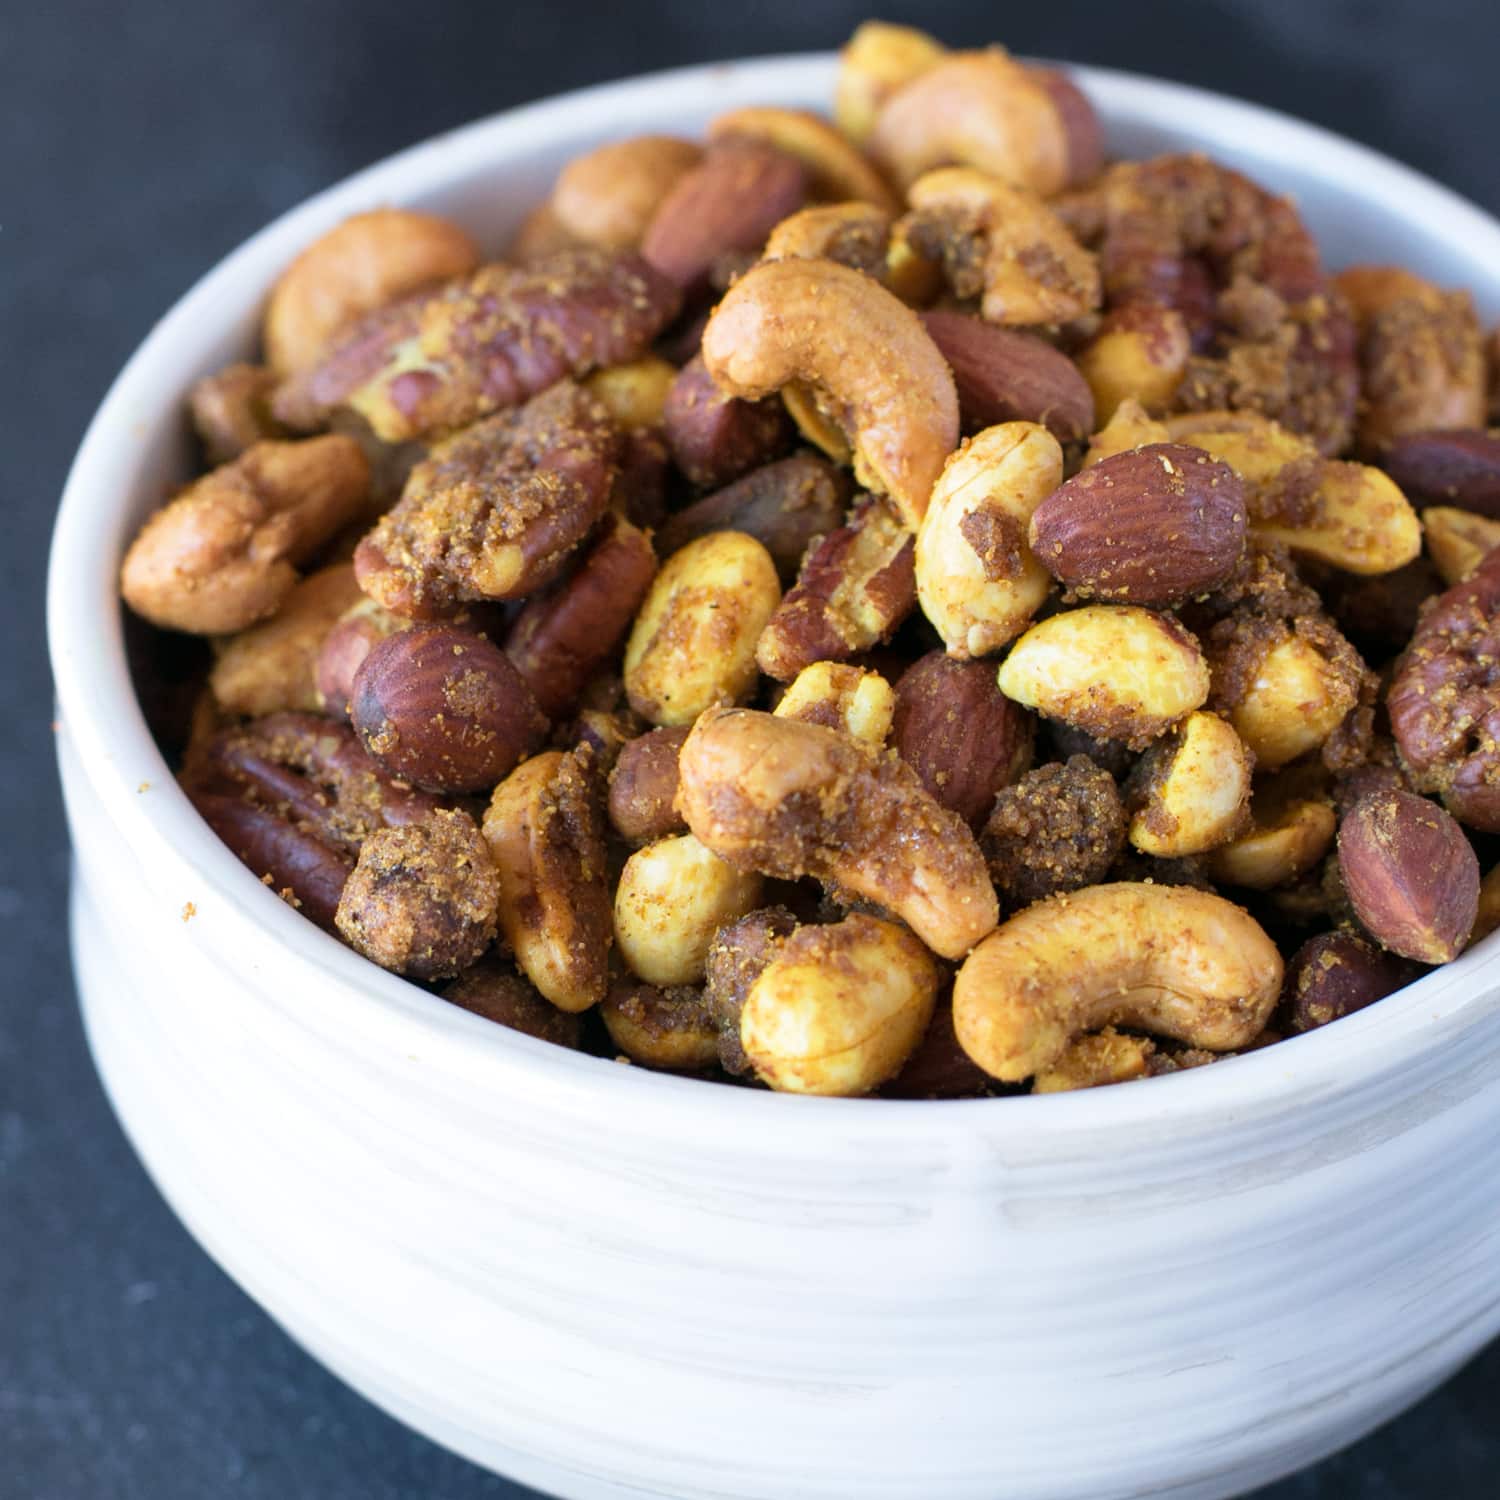 Curried Nut Mix